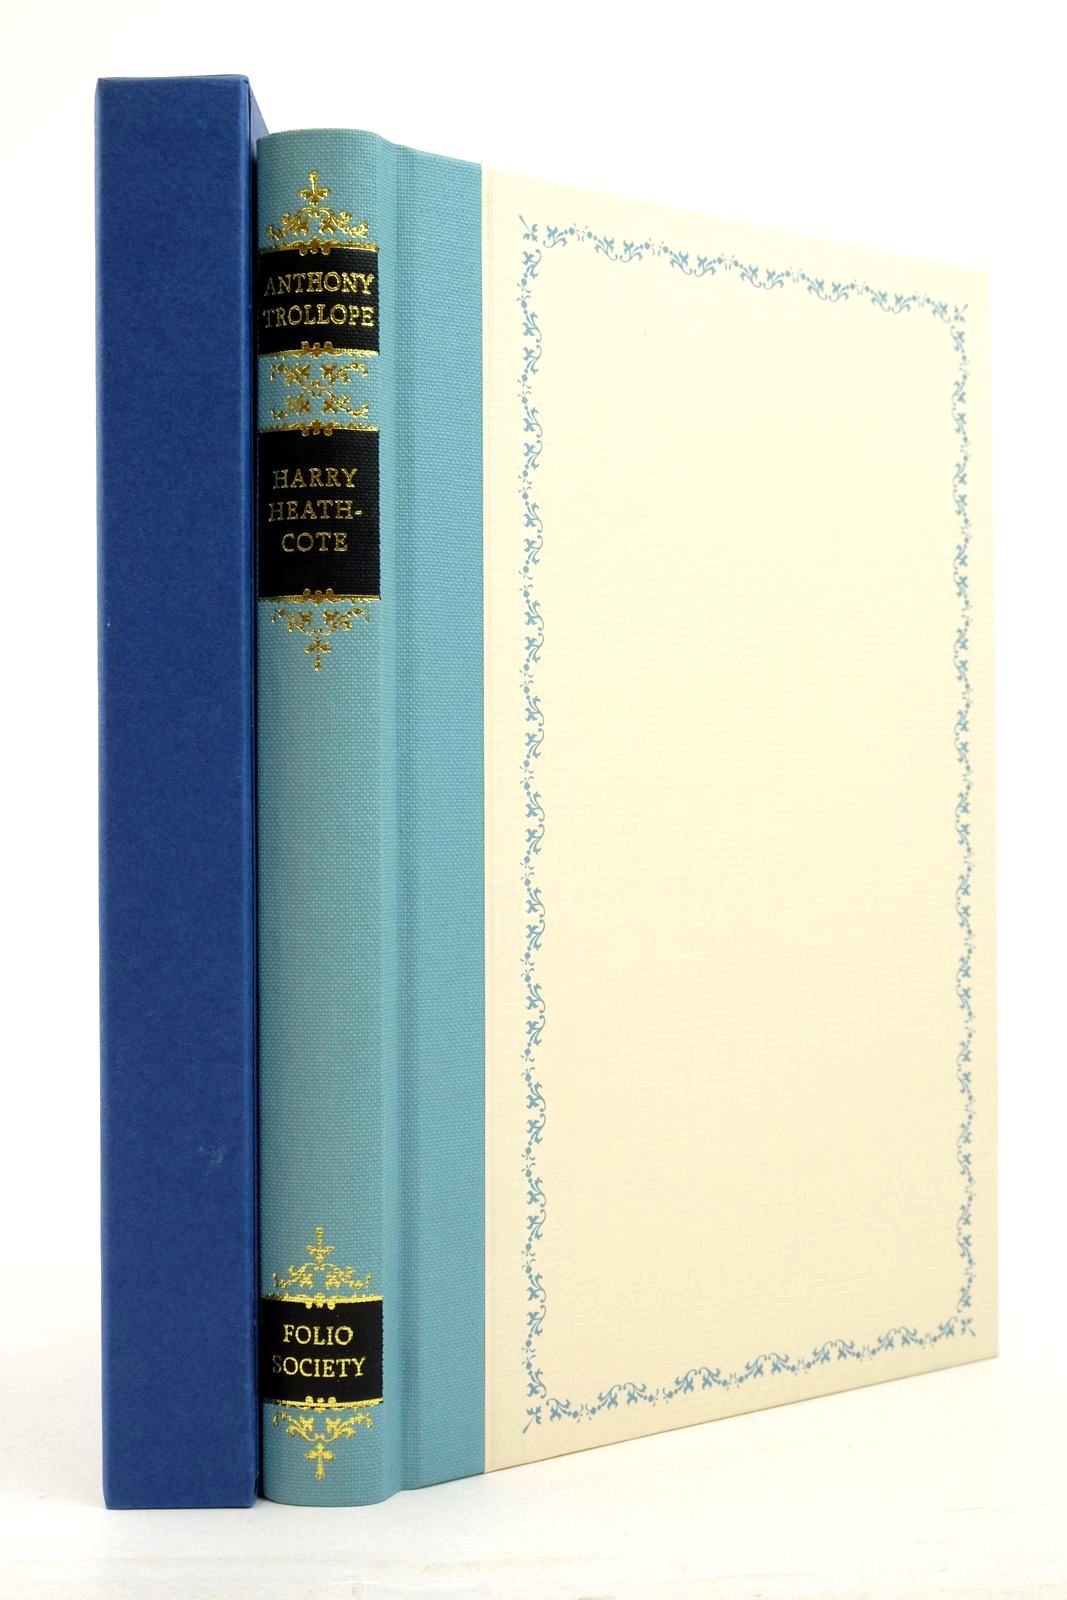 Photo of HARRY HEATHCOTE OF GANGOIL written by Trollope, Anthony illustrated by Waters, Rod published by Folio Society (STOCK CODE: 2138166)  for sale by Stella & Rose's Books